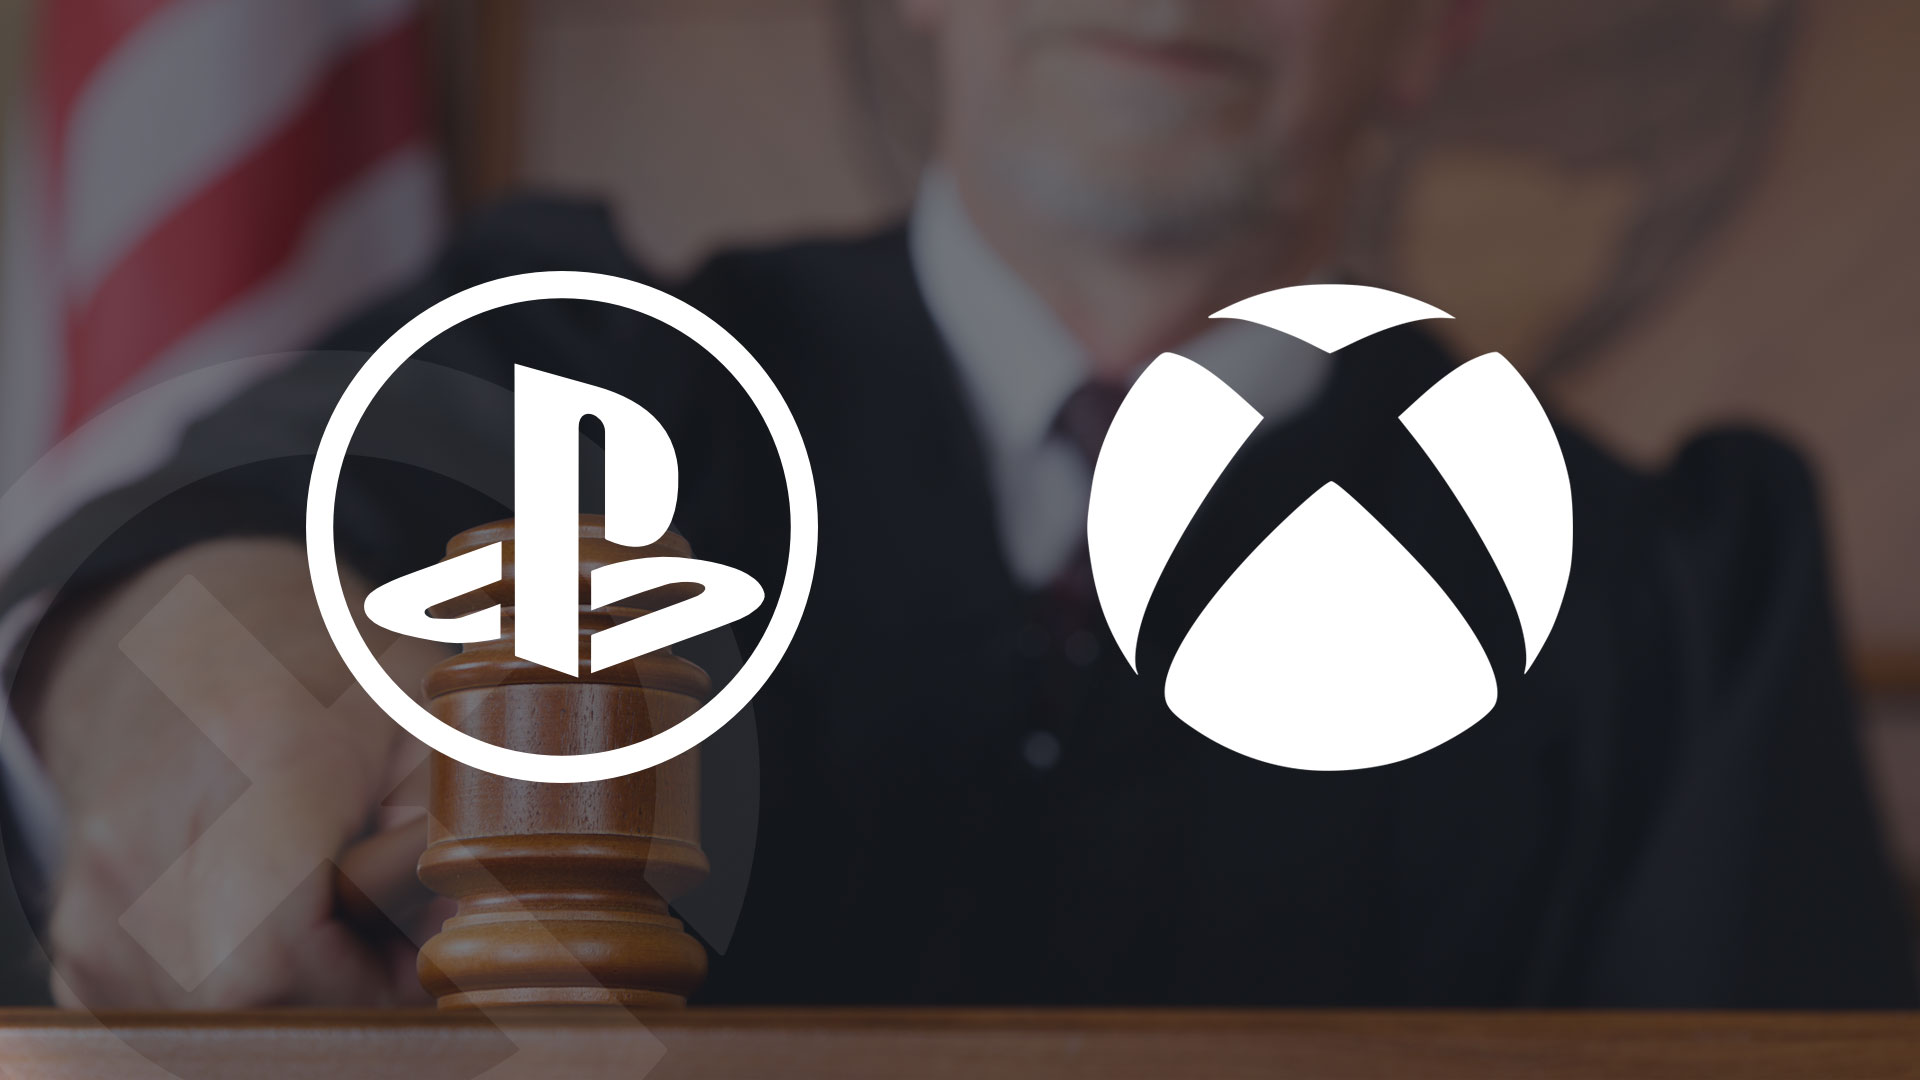 Sony refuses to sign and cancels Microsoft’s deal at EU court hearing